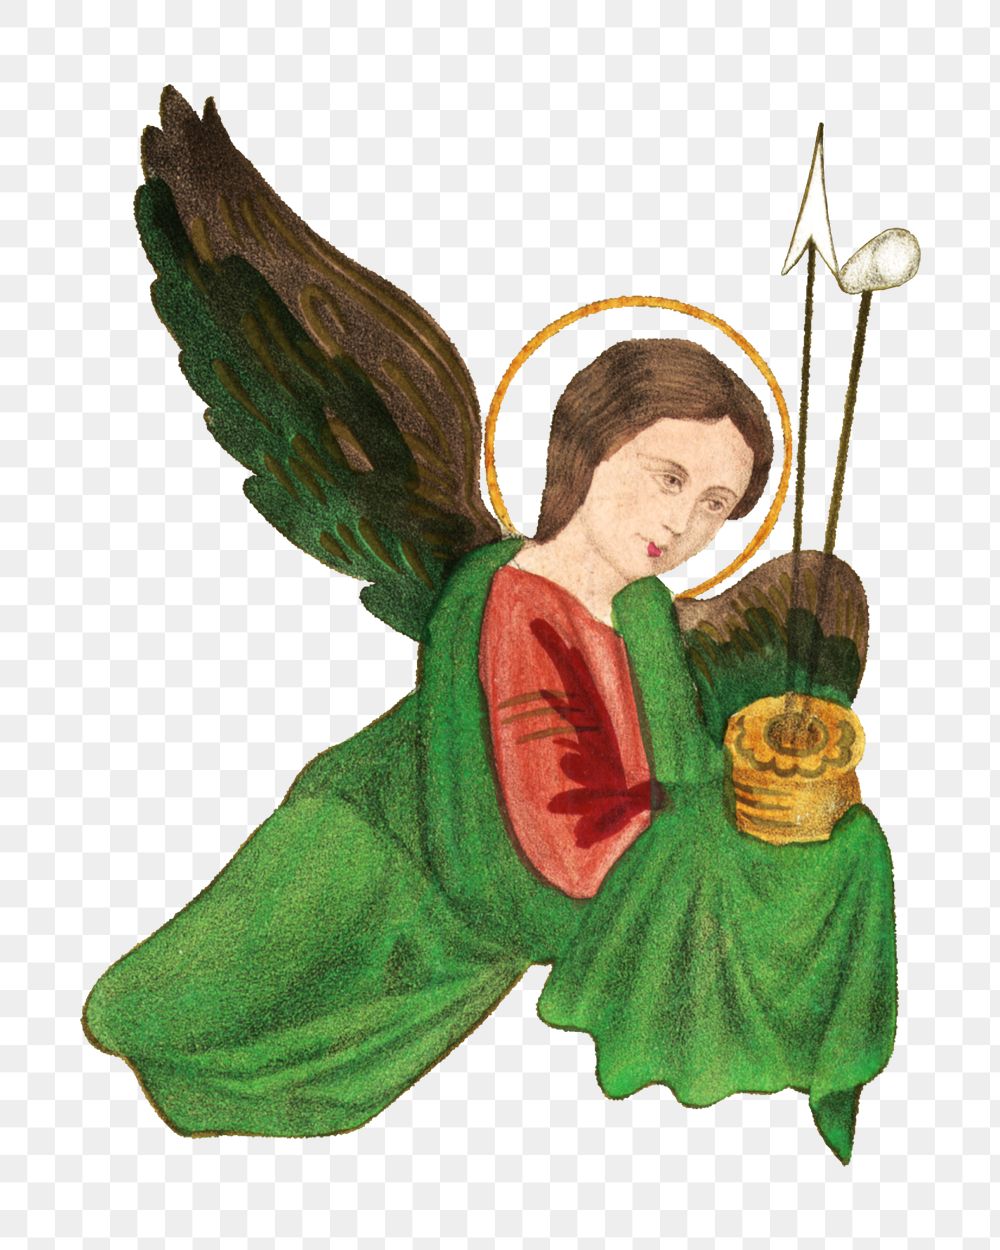 Angel holding arrows png sticker, vintage religious on transparent background.   Remastered by rawpixel